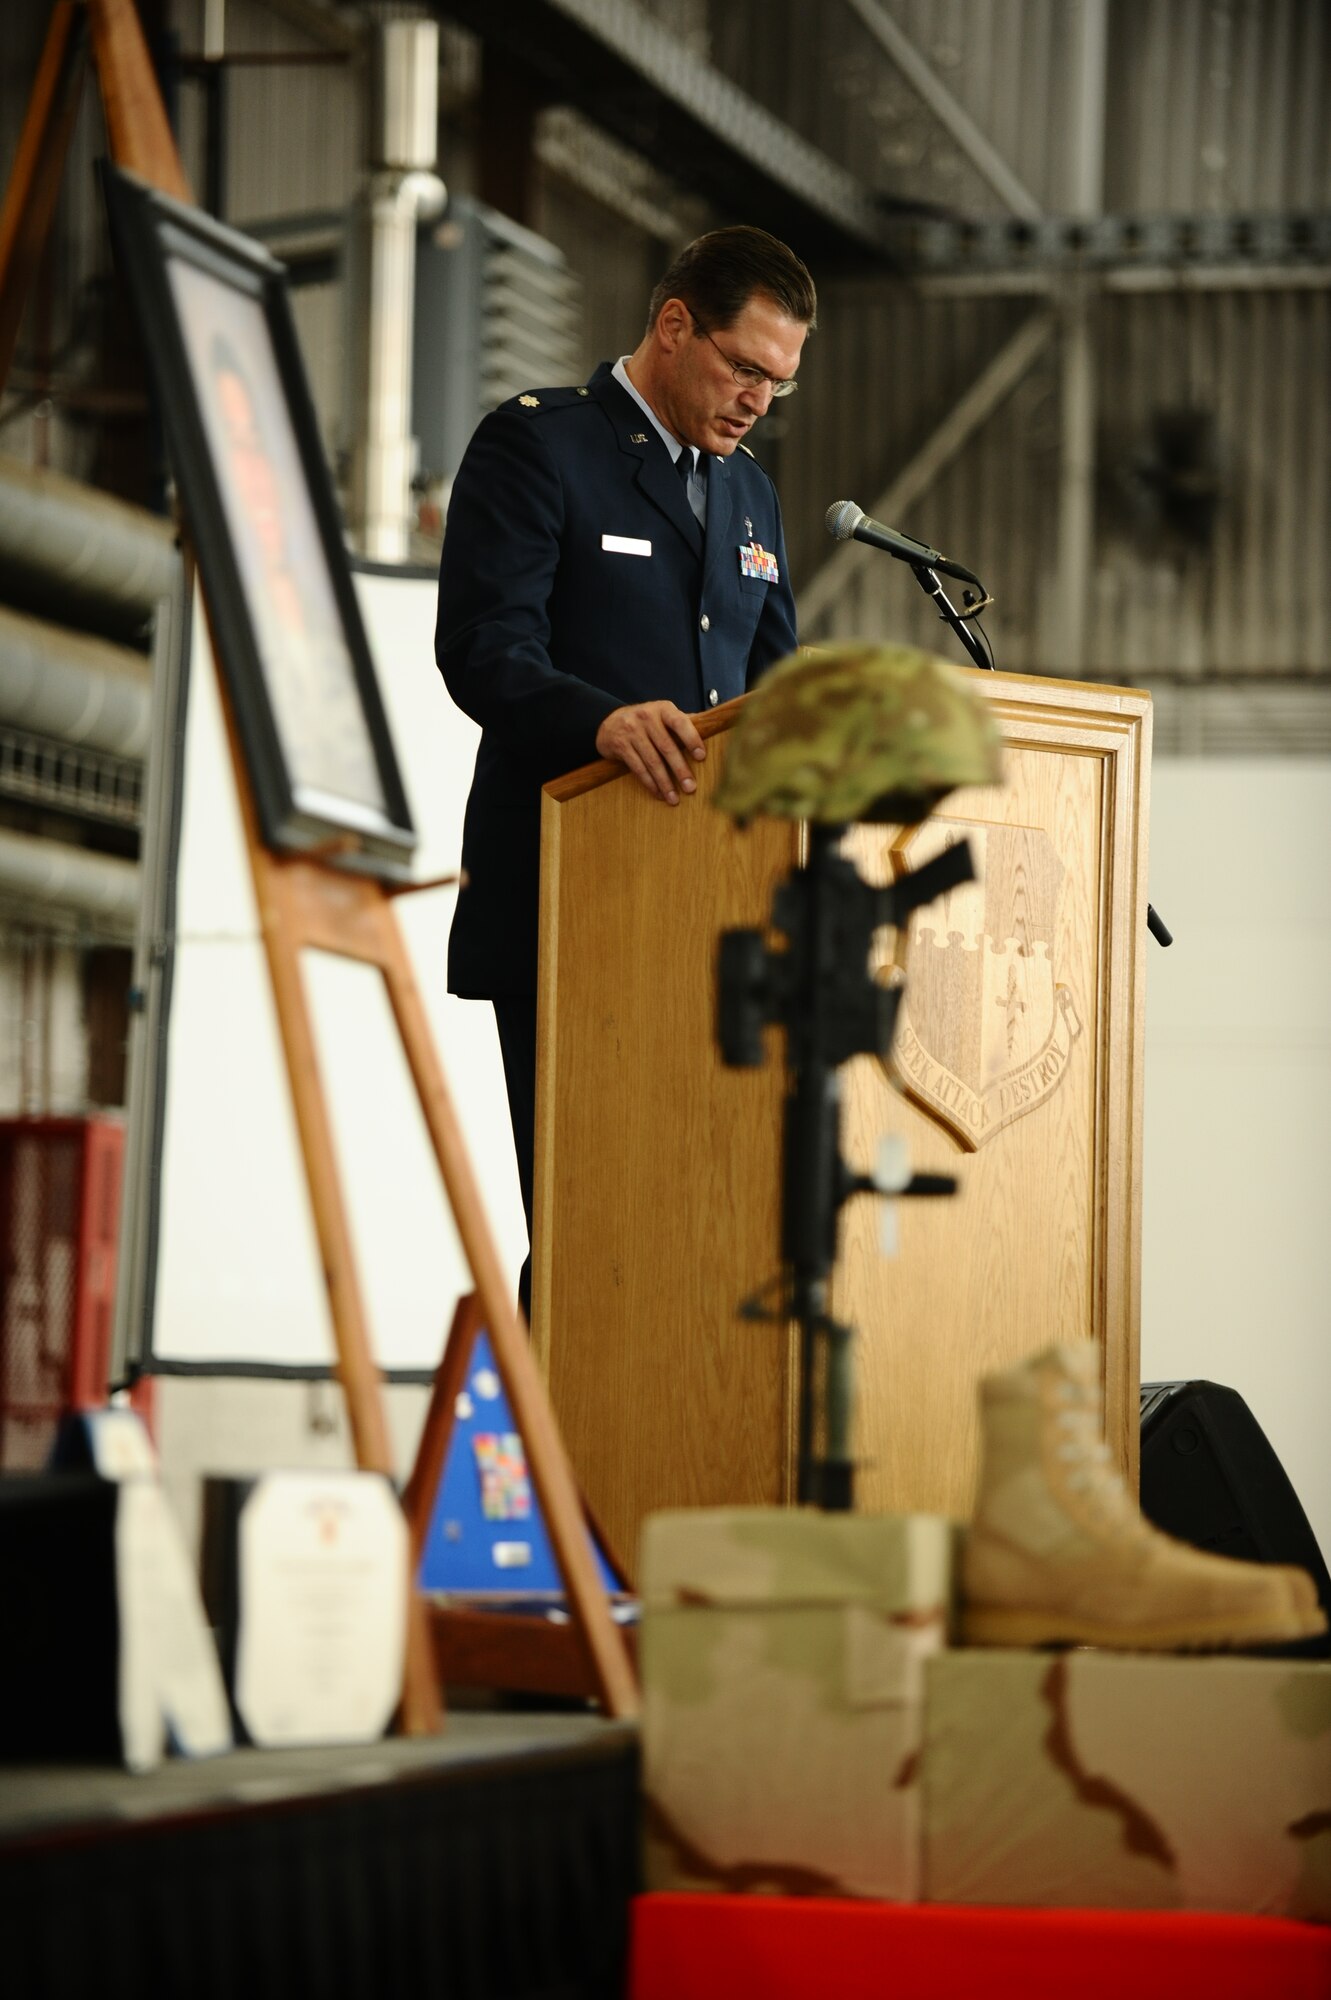 SPANGDAHLEM AIR BASE, Germany – Chaplain Lt. Col. David Carr, 52nd Fighter Wing chaplain, prays during the invocation of the memorial service for Staff Sgt. Joseph J. Hamski, 52nd Civil Engineer Squadron Explosive Ordnance Disposal Flight, held here June 16. Sergeant Hamski was killed in action May 26, 2011, in Shorabak, Afghanistan, while responding to a known enemy weapons cache. (U.S. Air Force photo/Senior Airman Nathanael Callon)